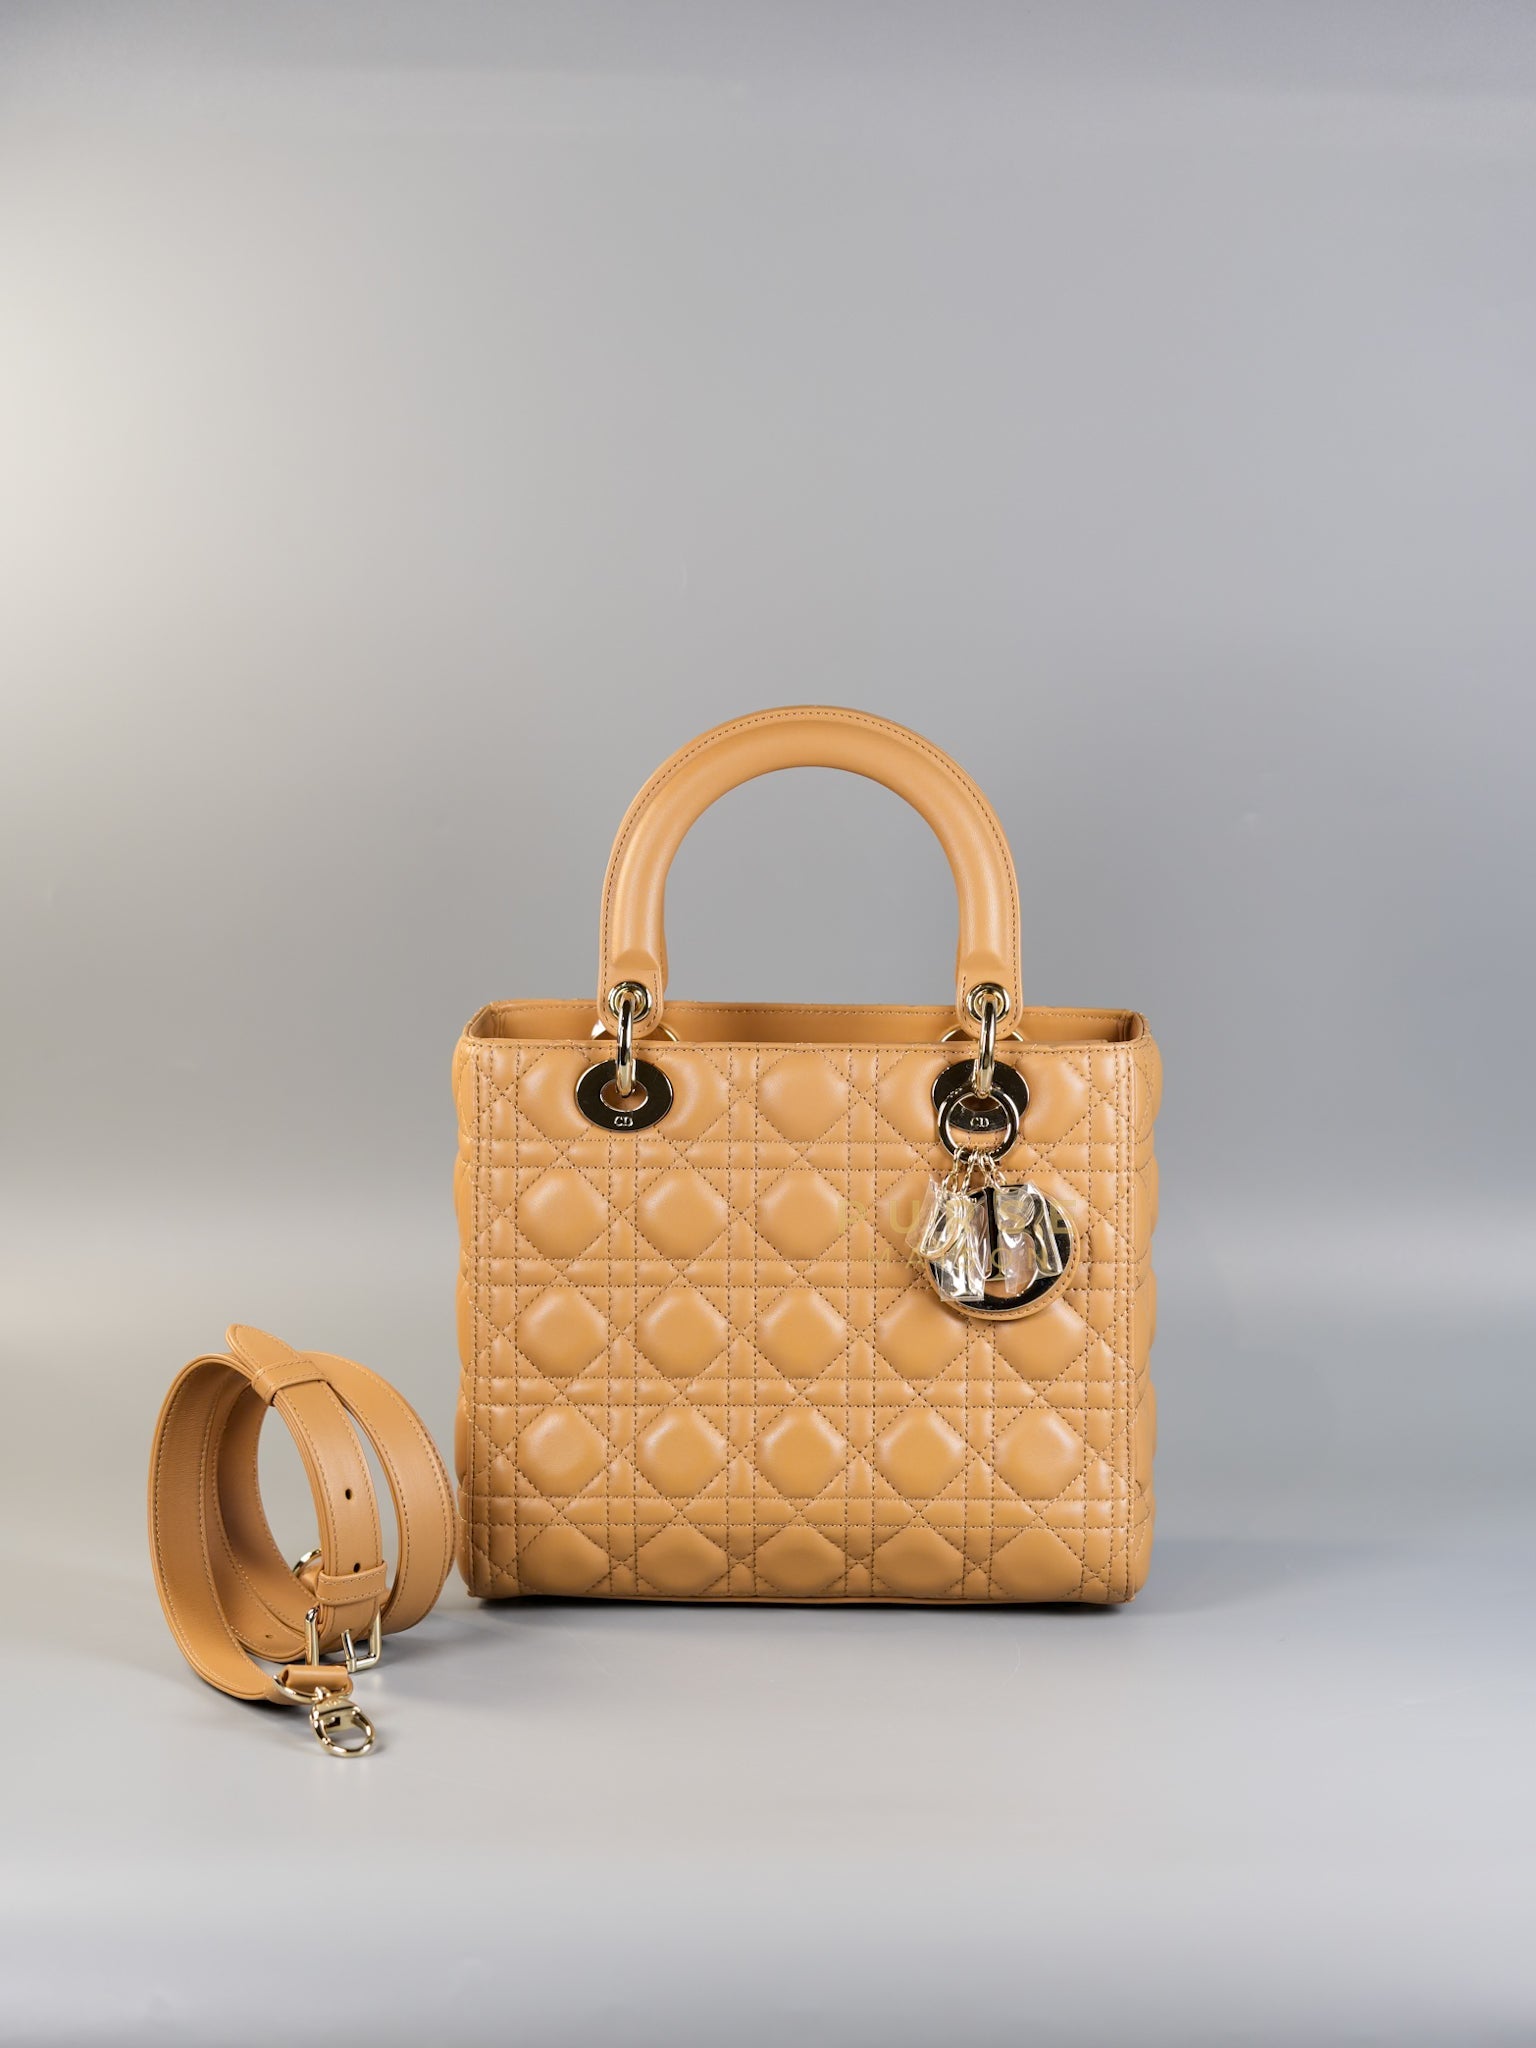 Lady Dior Medium in Biscuit Lambskin Leather & Light Gold Hardware | Purse Maison Luxury Bags Shop